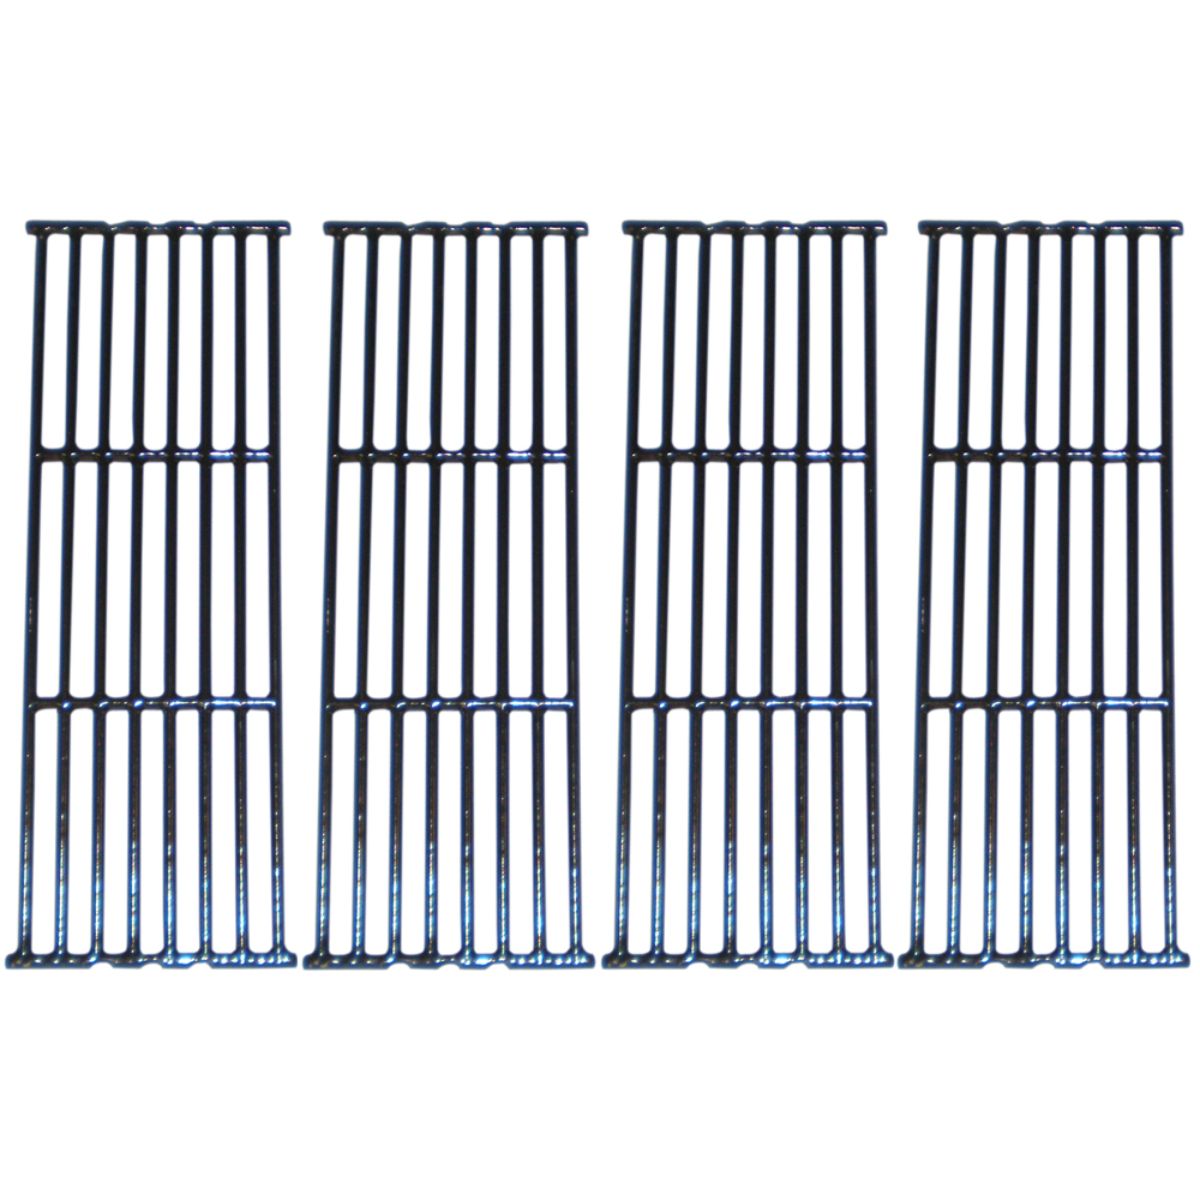 Gloss cast iron cooking grid for Broil King, Broil-Mate, Huntington, Sterling brand gas grills